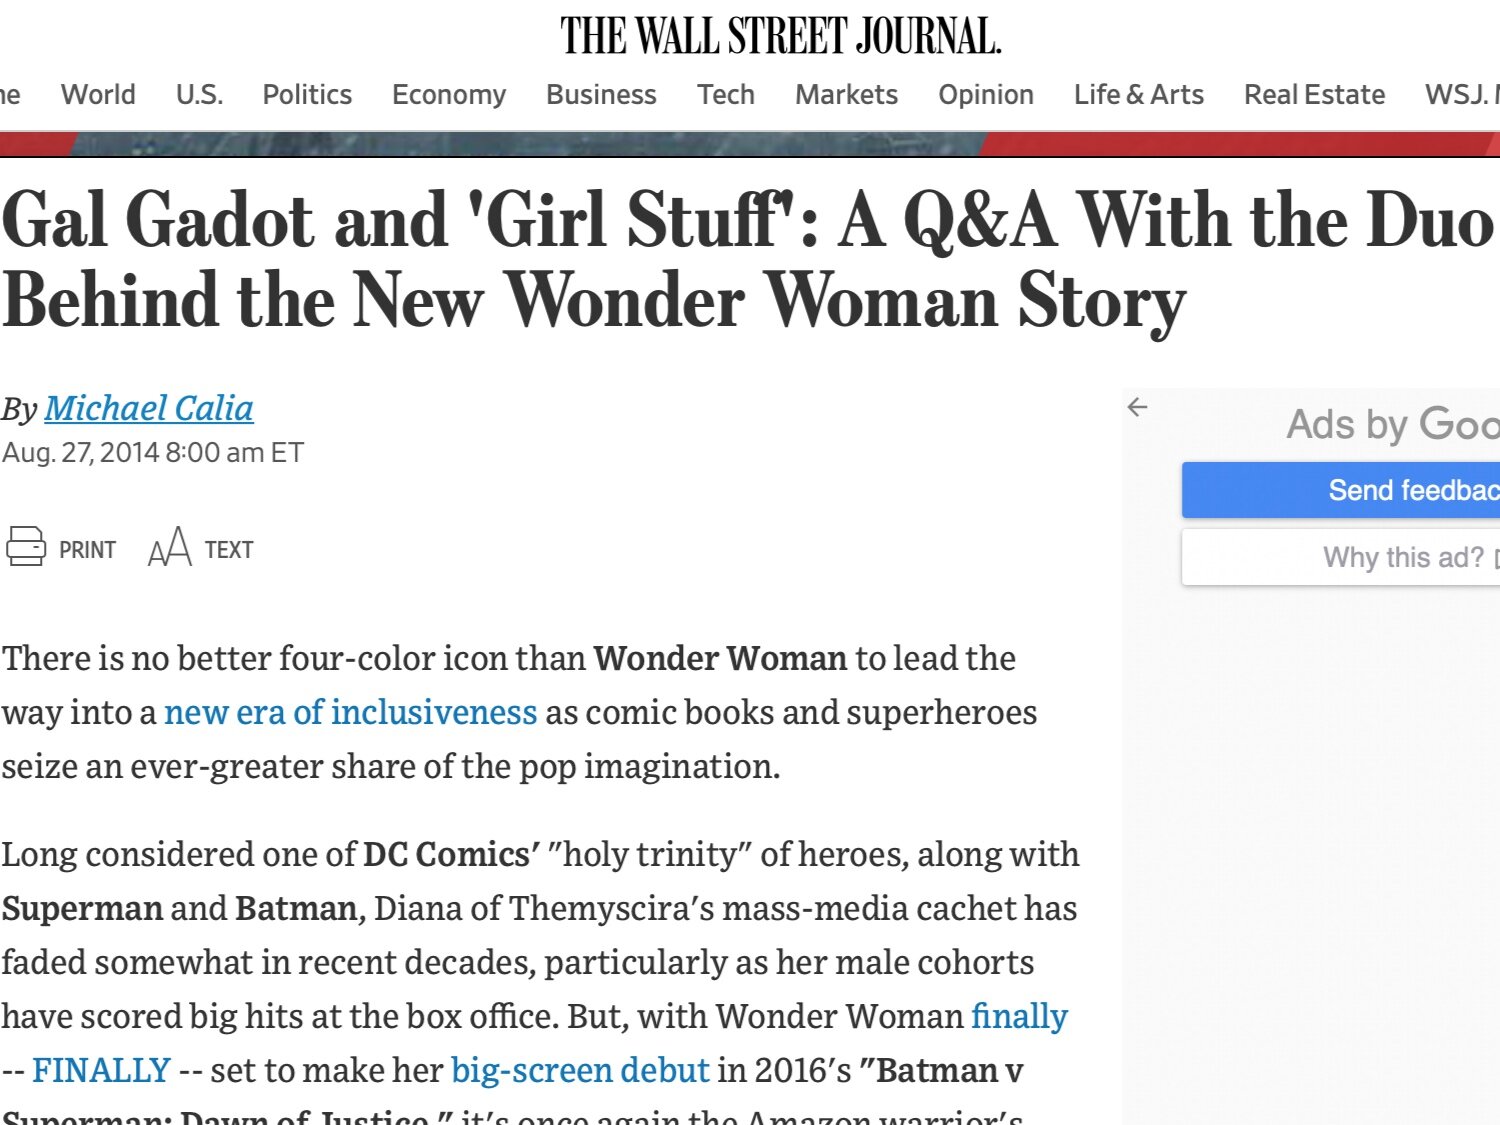 THE WALL STREET JOURNAL: Glad Gadot and "Girl Stuff: A Q&amp; A with the Duo Behind the New Wonder Woman Story